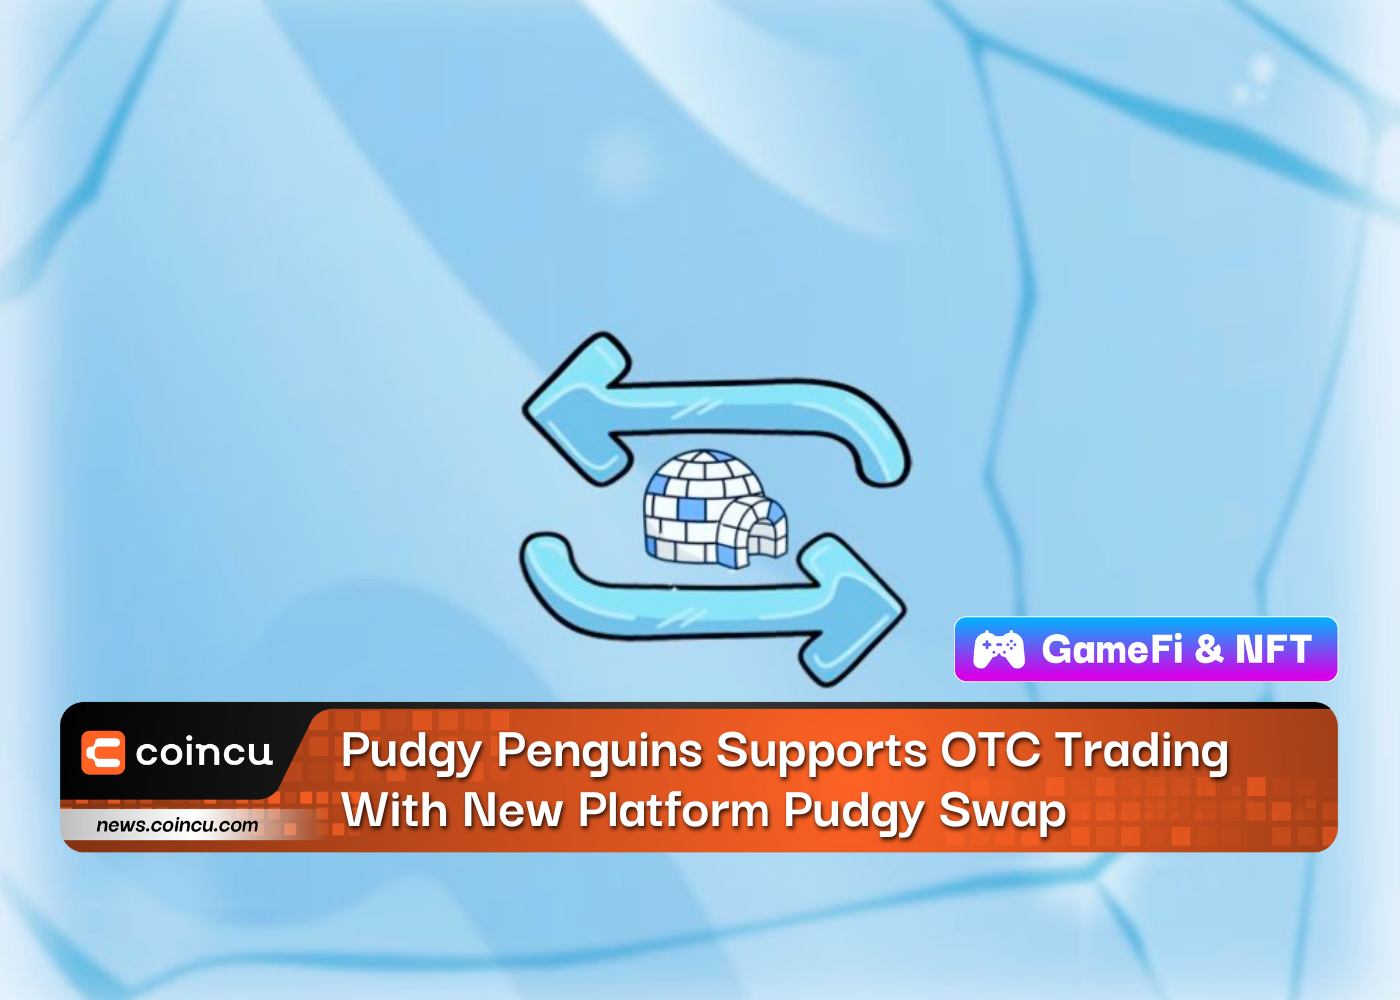 Pudgy Penguins Supports OTC Trading With New Platform Pudgy Swap